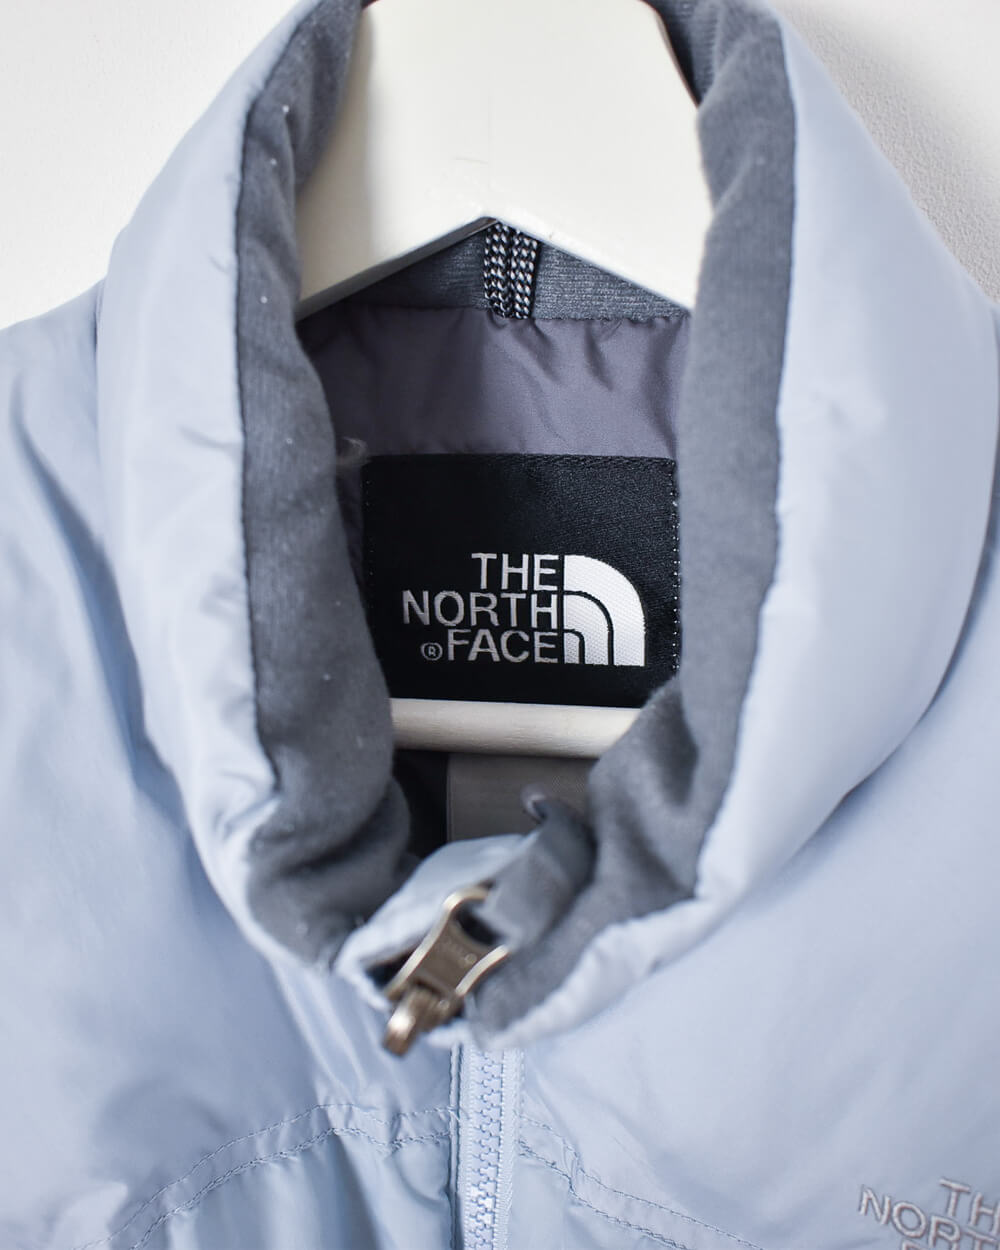 The North Face Women's Puffer Jacket - Large - Domno Vintage 90s, 80s, 00s Retro and Vintage Clothing 